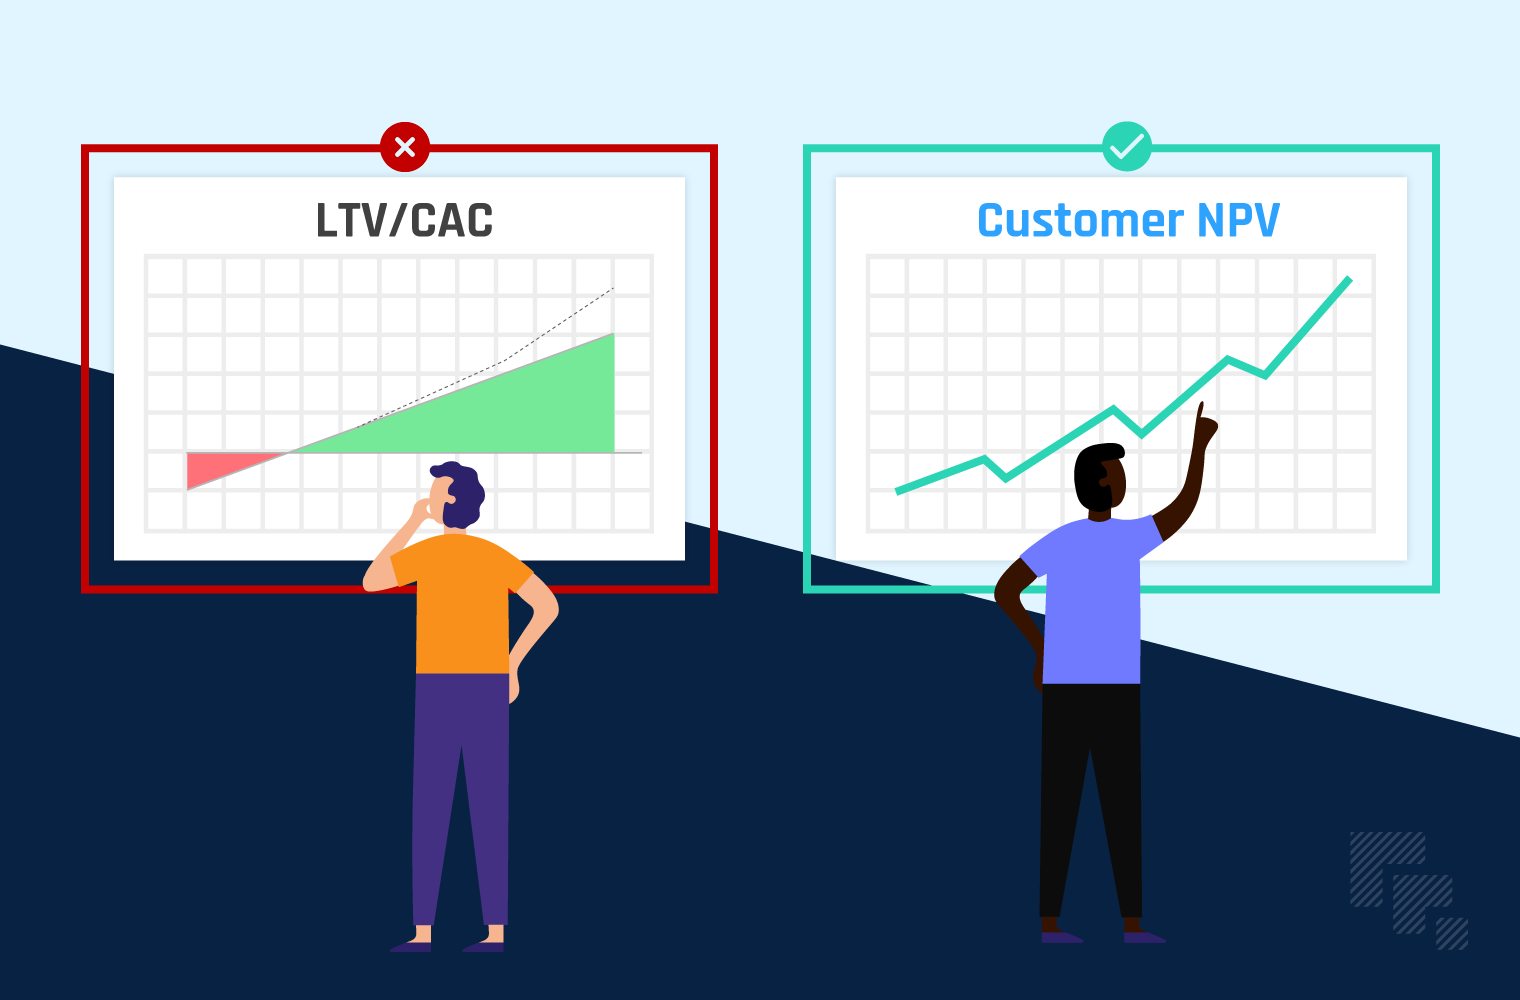 Why LTV/CAC is a Misleading SaaS Metric and Should be Replaced with Customer NPV